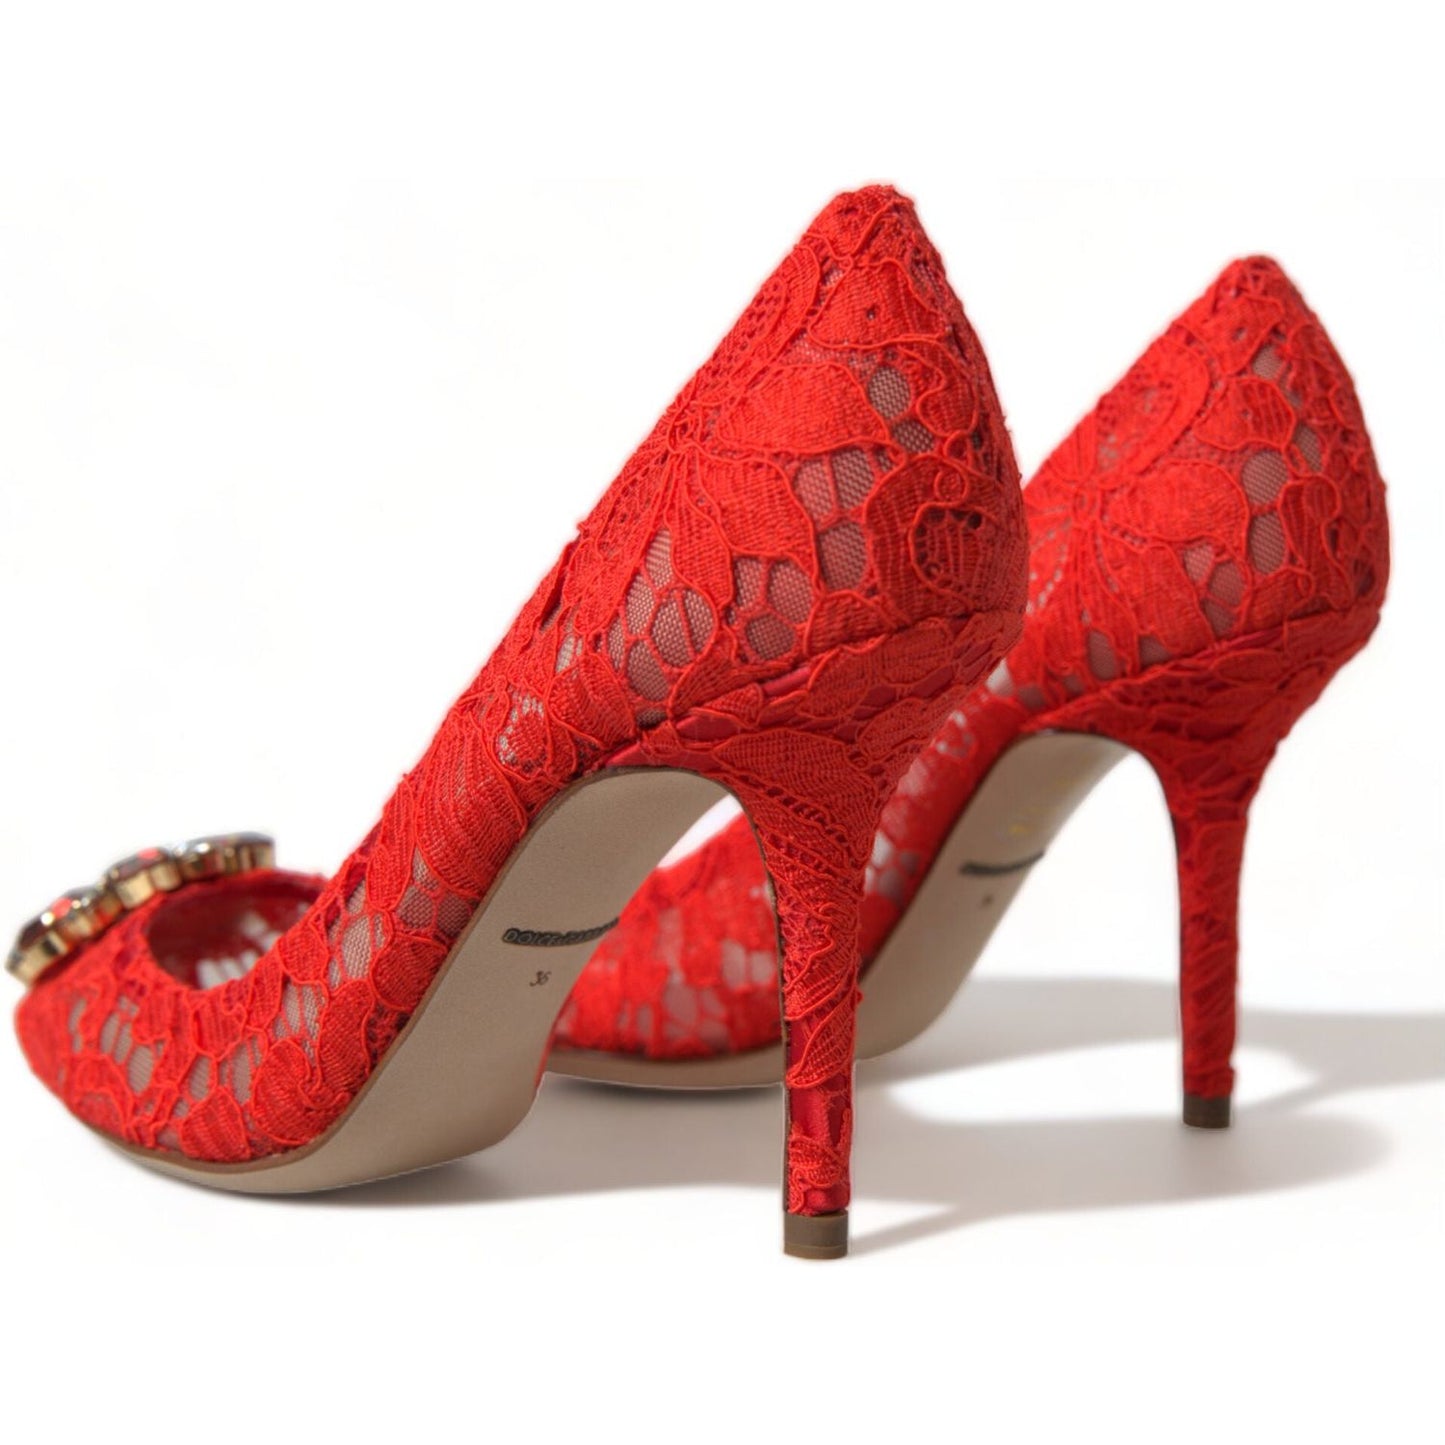 Dolce & Gabbana Exquisite Crystal-Embellished Red Lace Heels red-taormina-lace-crystal-heels-pumps-shoes-1 465A9194-bg-scaled-59ac2b34-409.jpg